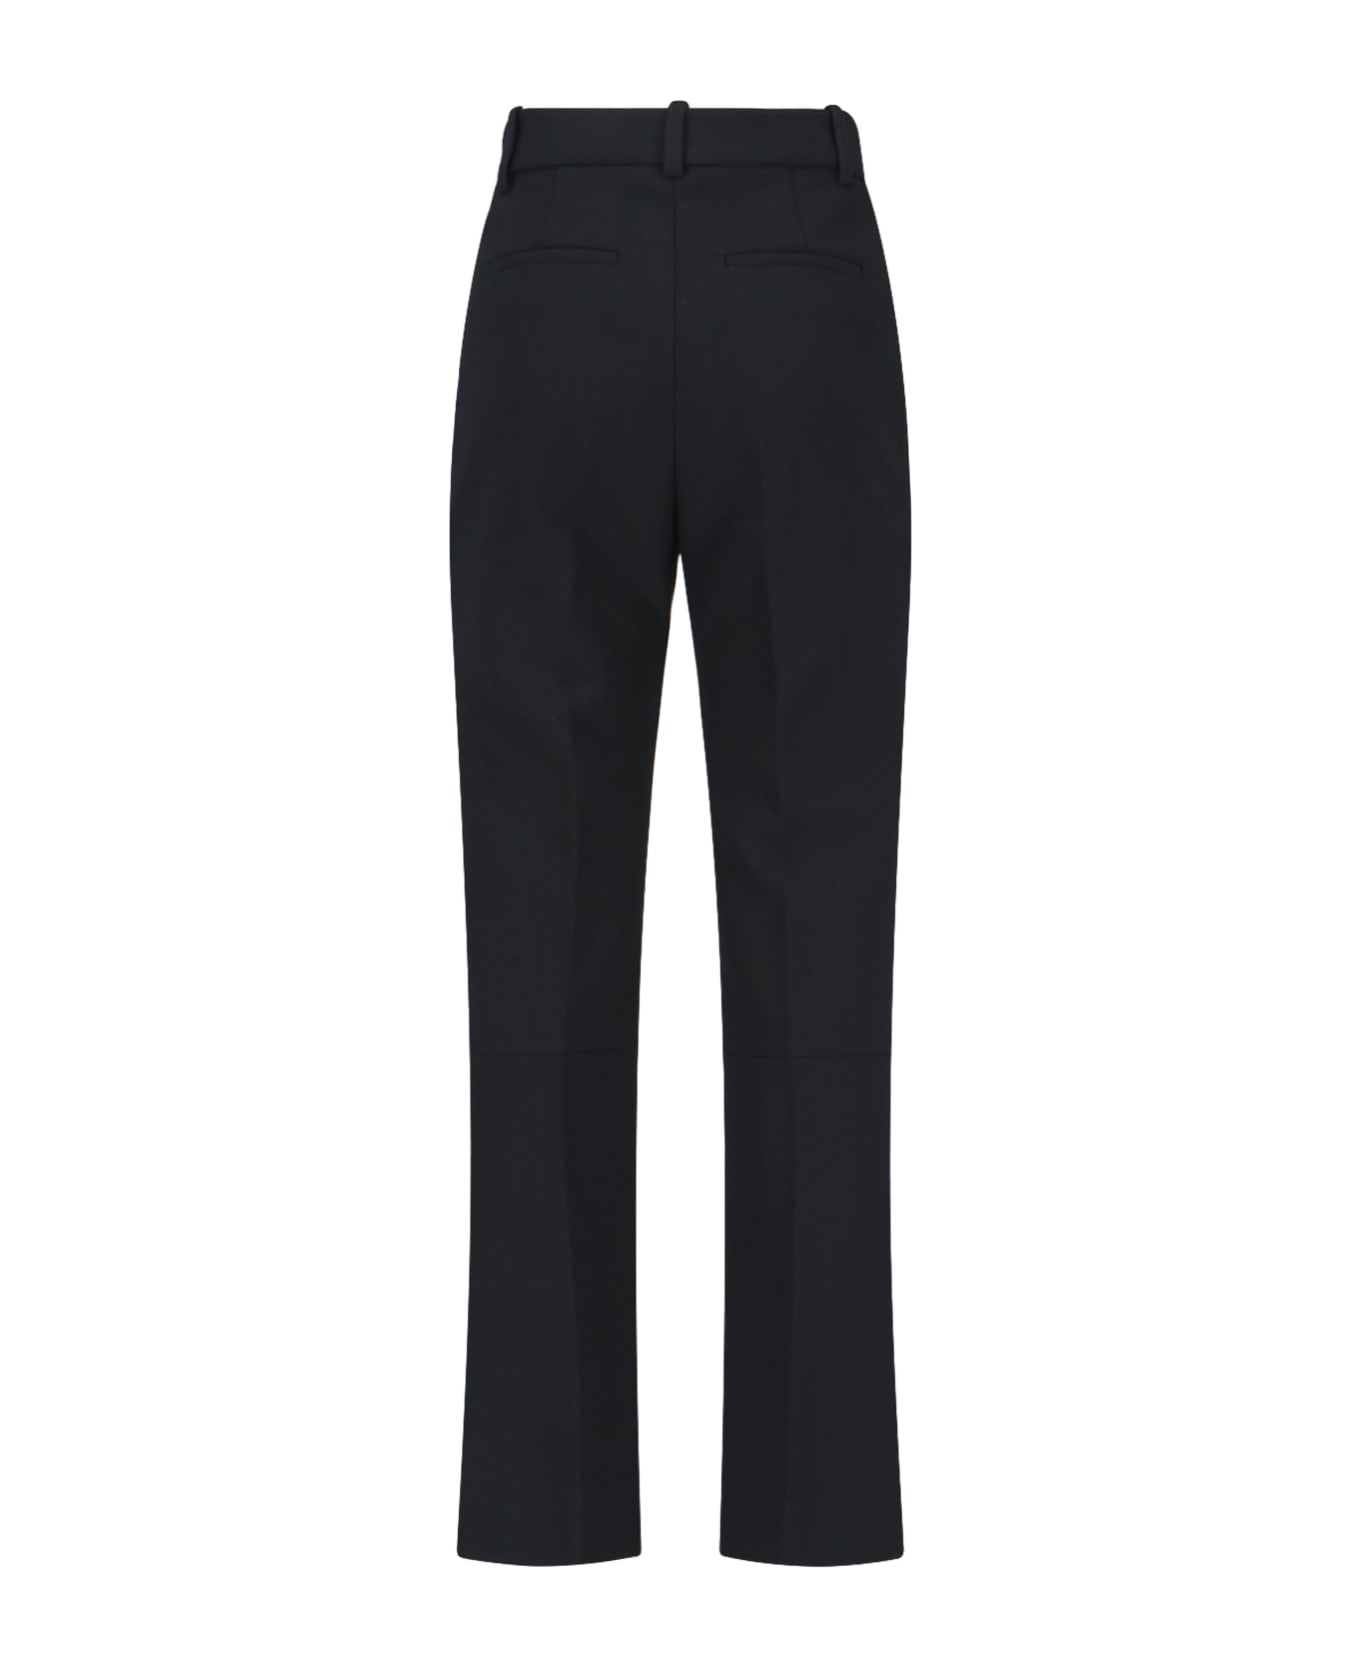 Victoria Beckham Tailored Trousers - Black   ボトムス